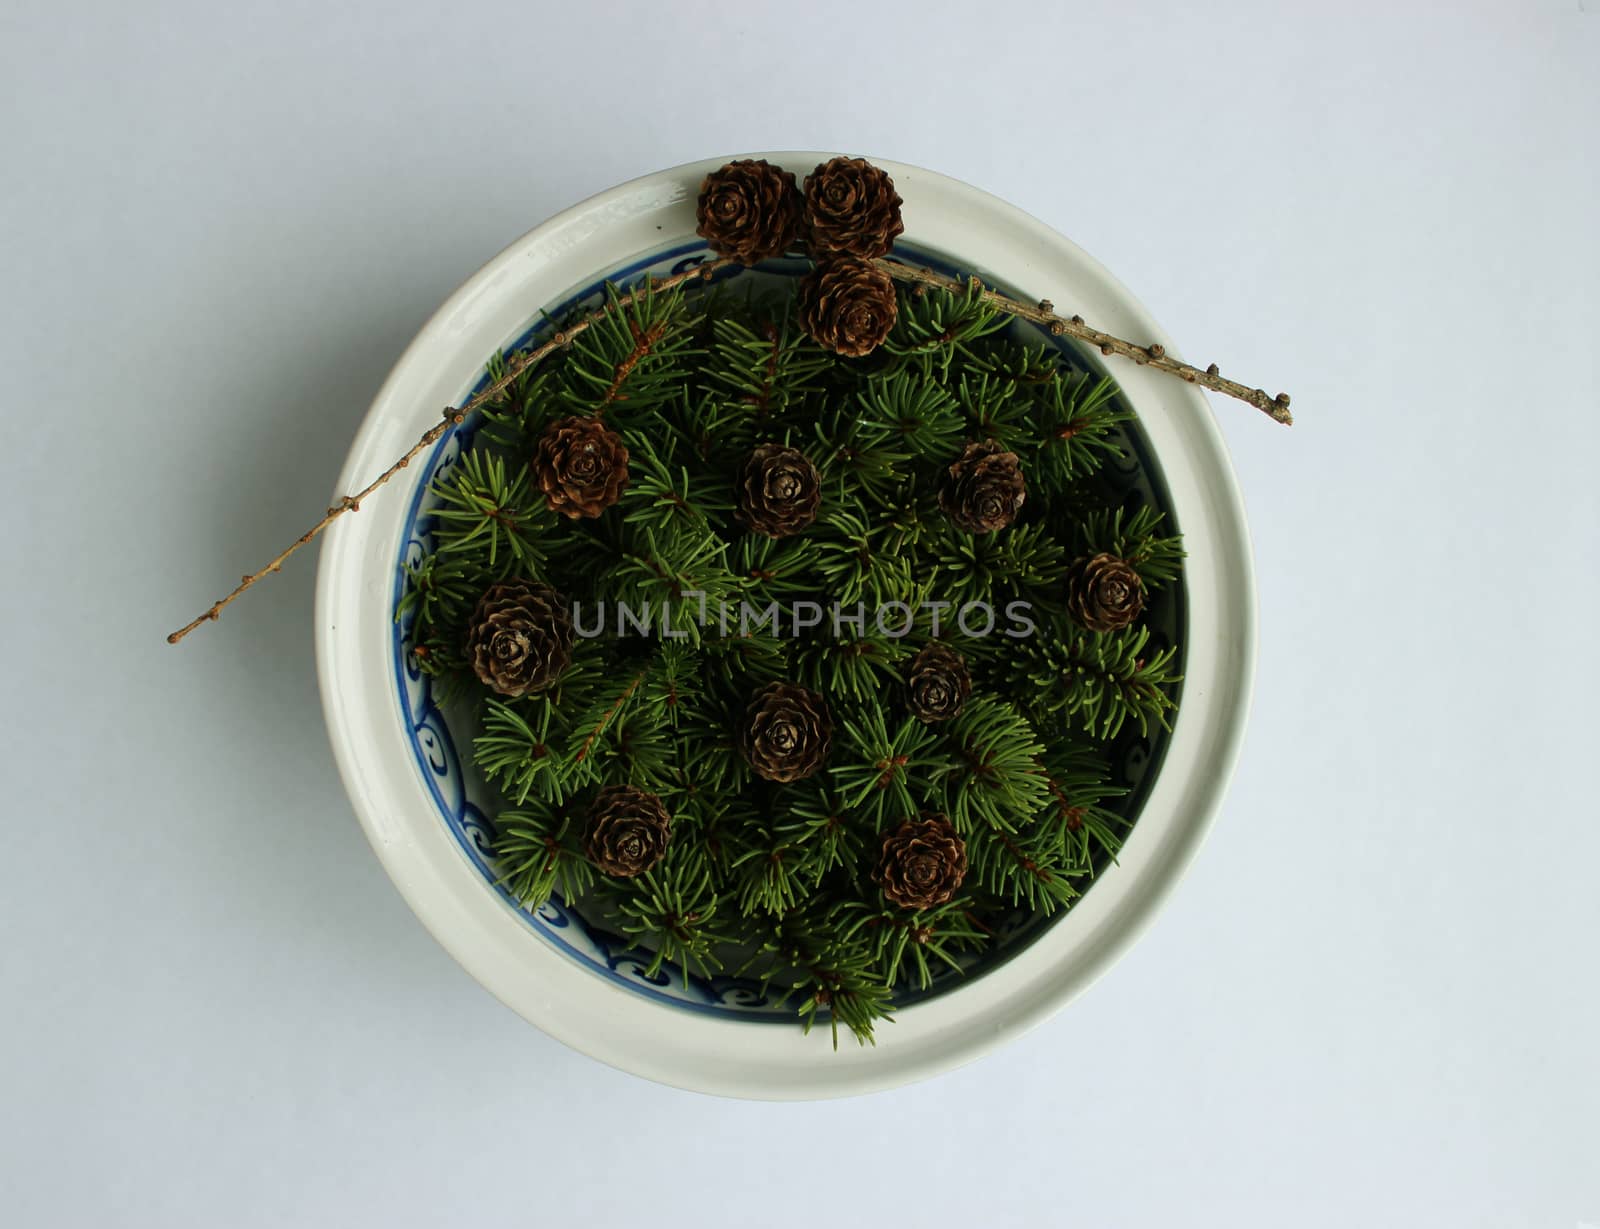 The composition of the larch cones and twigs eaten in a soup plate on a white background.